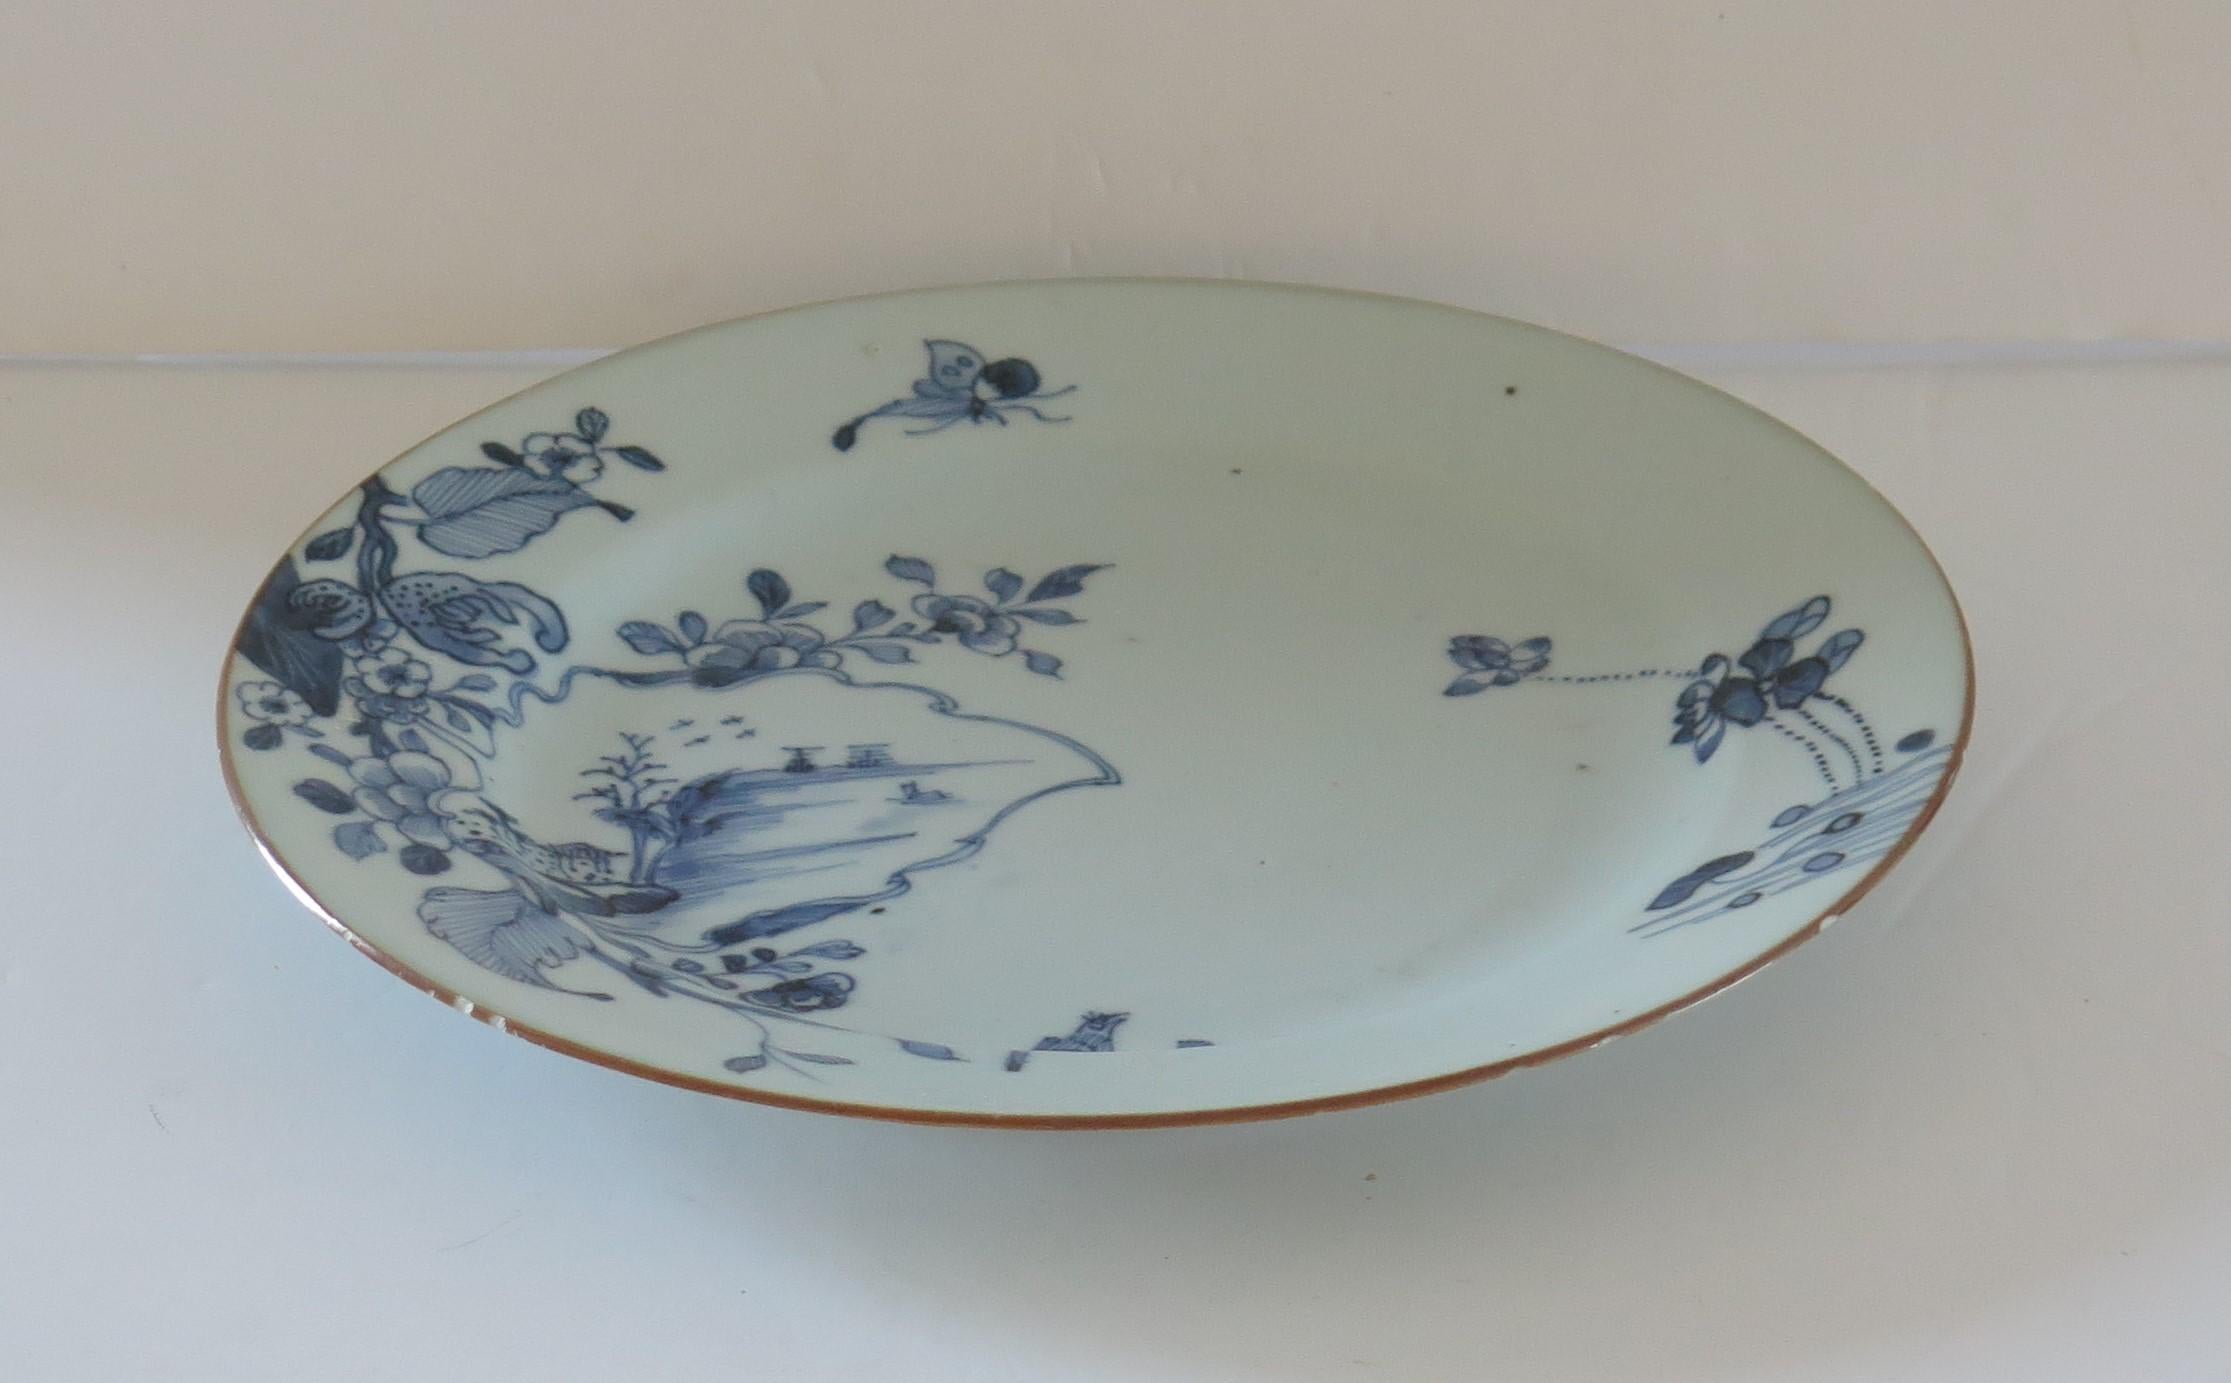 This is a beautiful hand painted blue and white Chinese porcelain plate, dating to the second half of the 18th century, circa 1770, Qing dynasty.

The plate is well potted, and has been hand decorated in varying shades of cobalt 'steel' blue. The